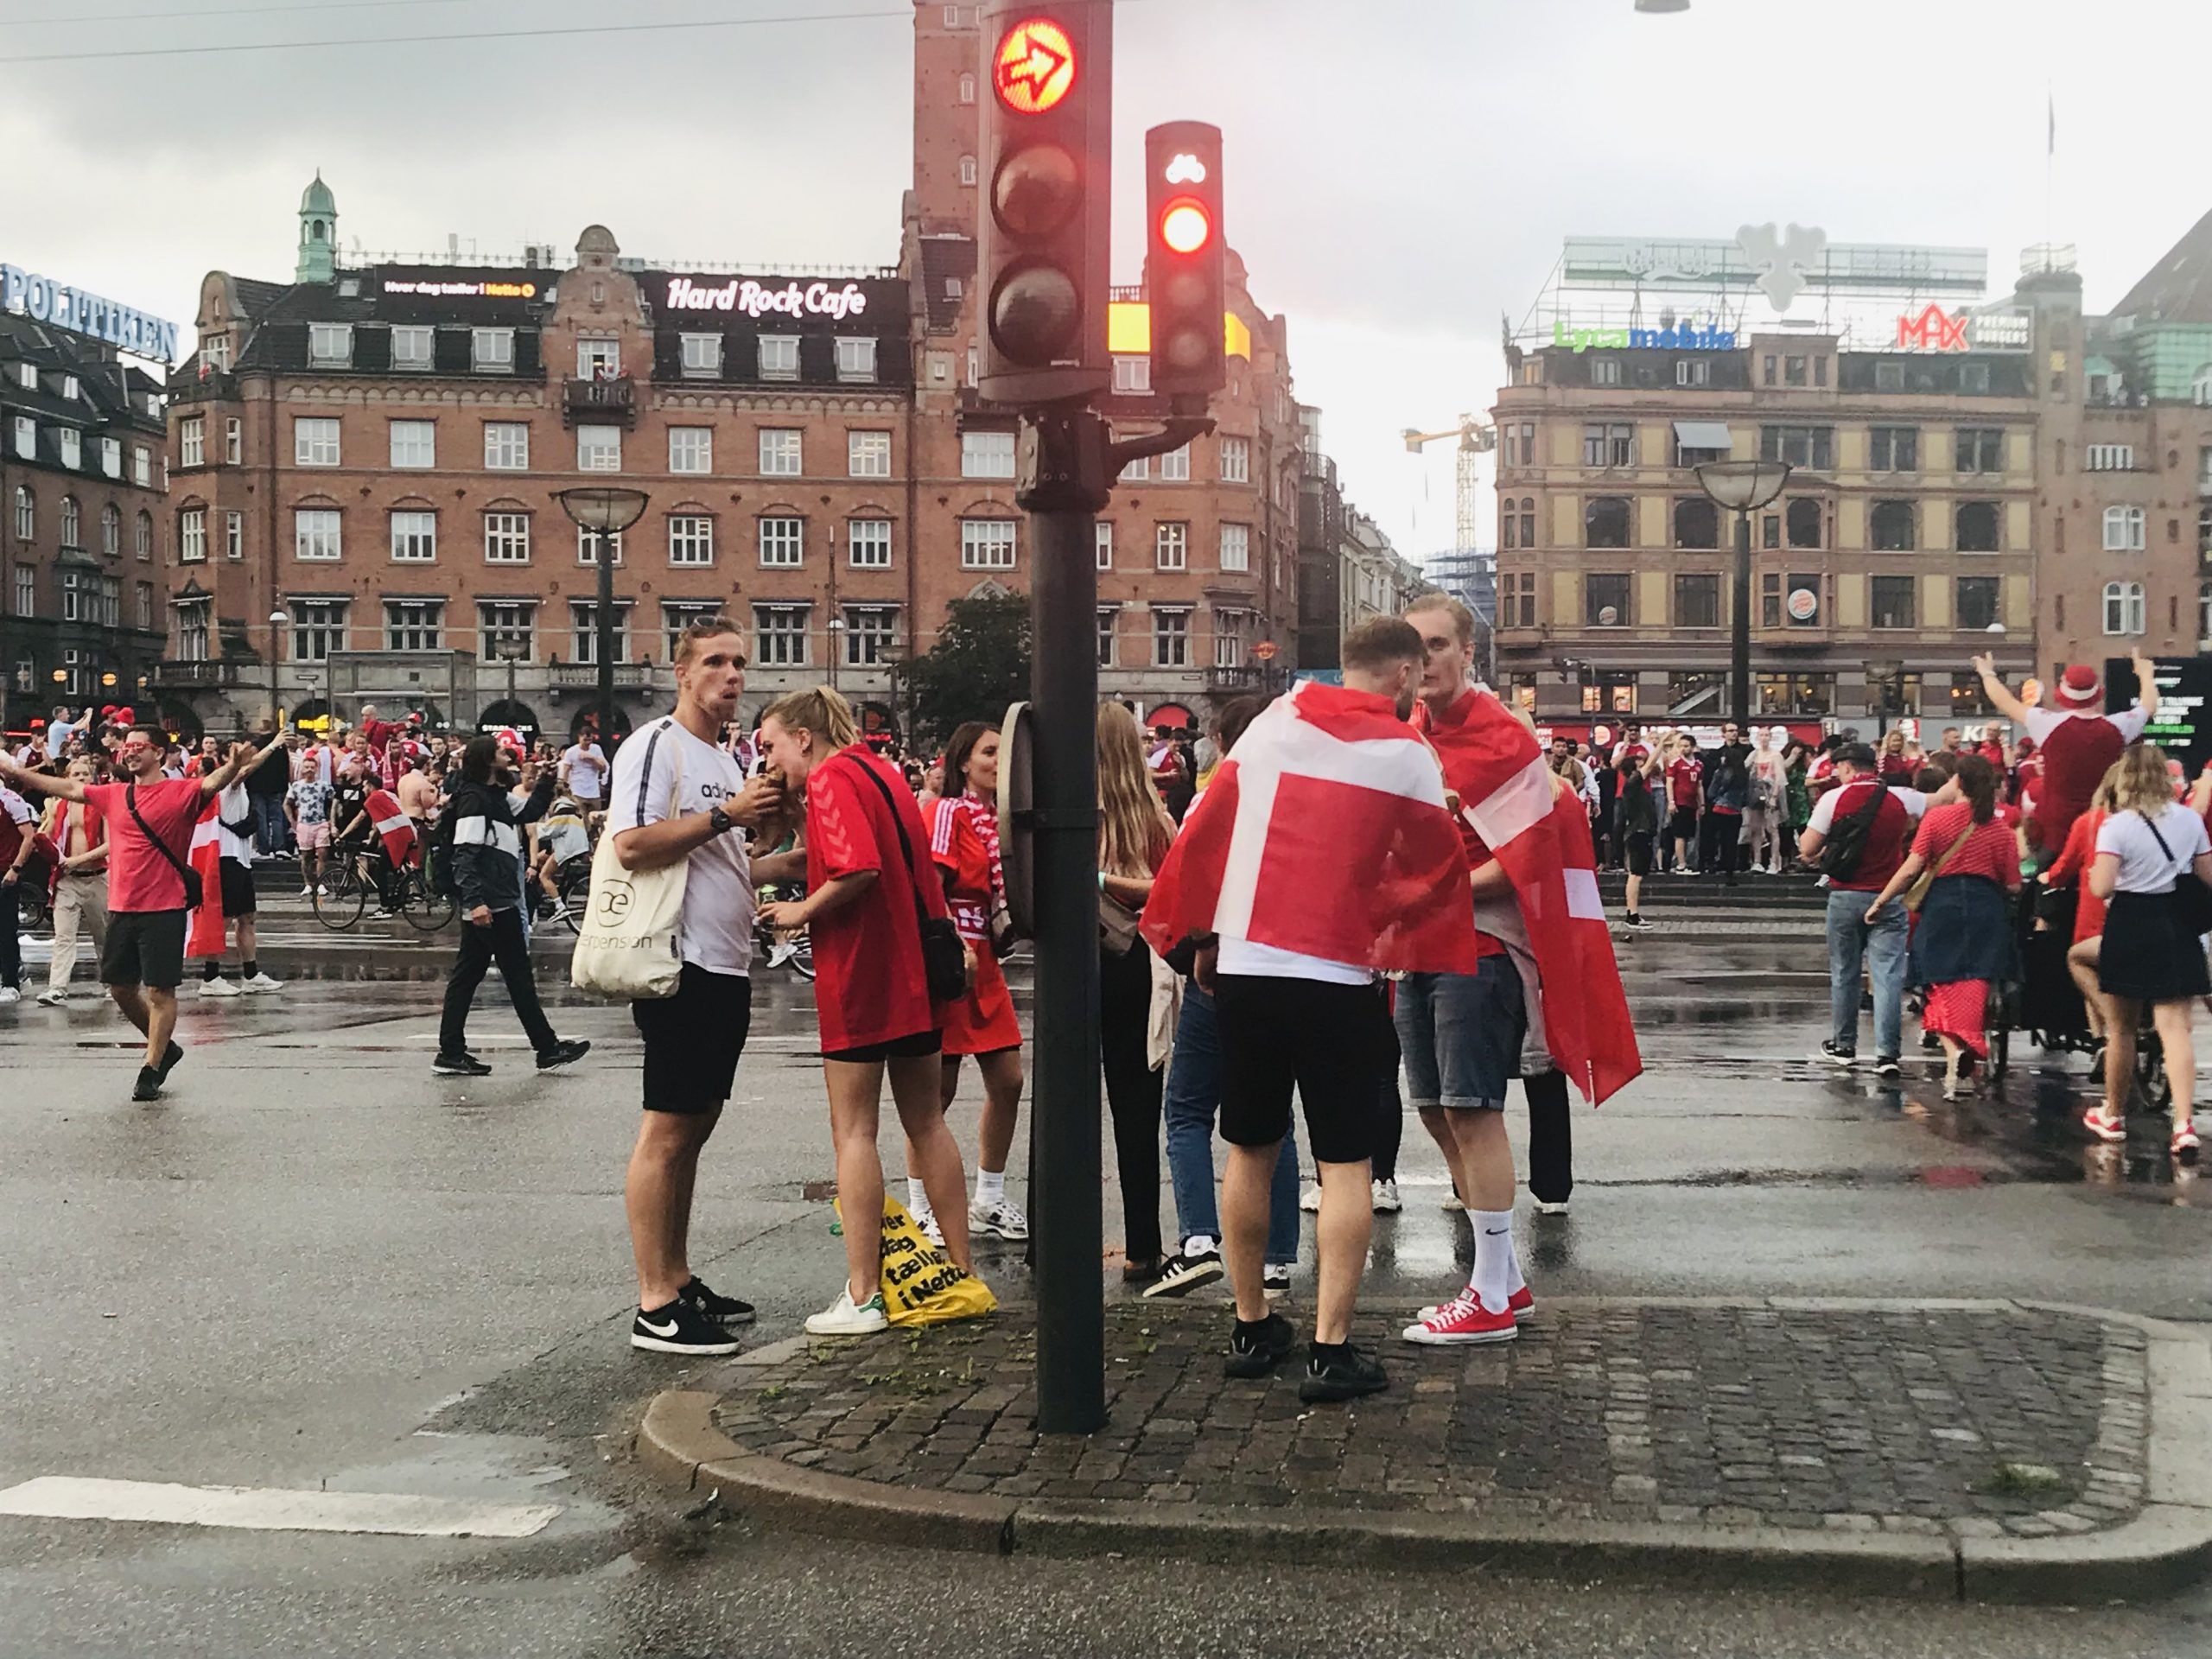 No entry to the UK for Euros semi: the biggest affront to Denmark since the 1807 firebombing?